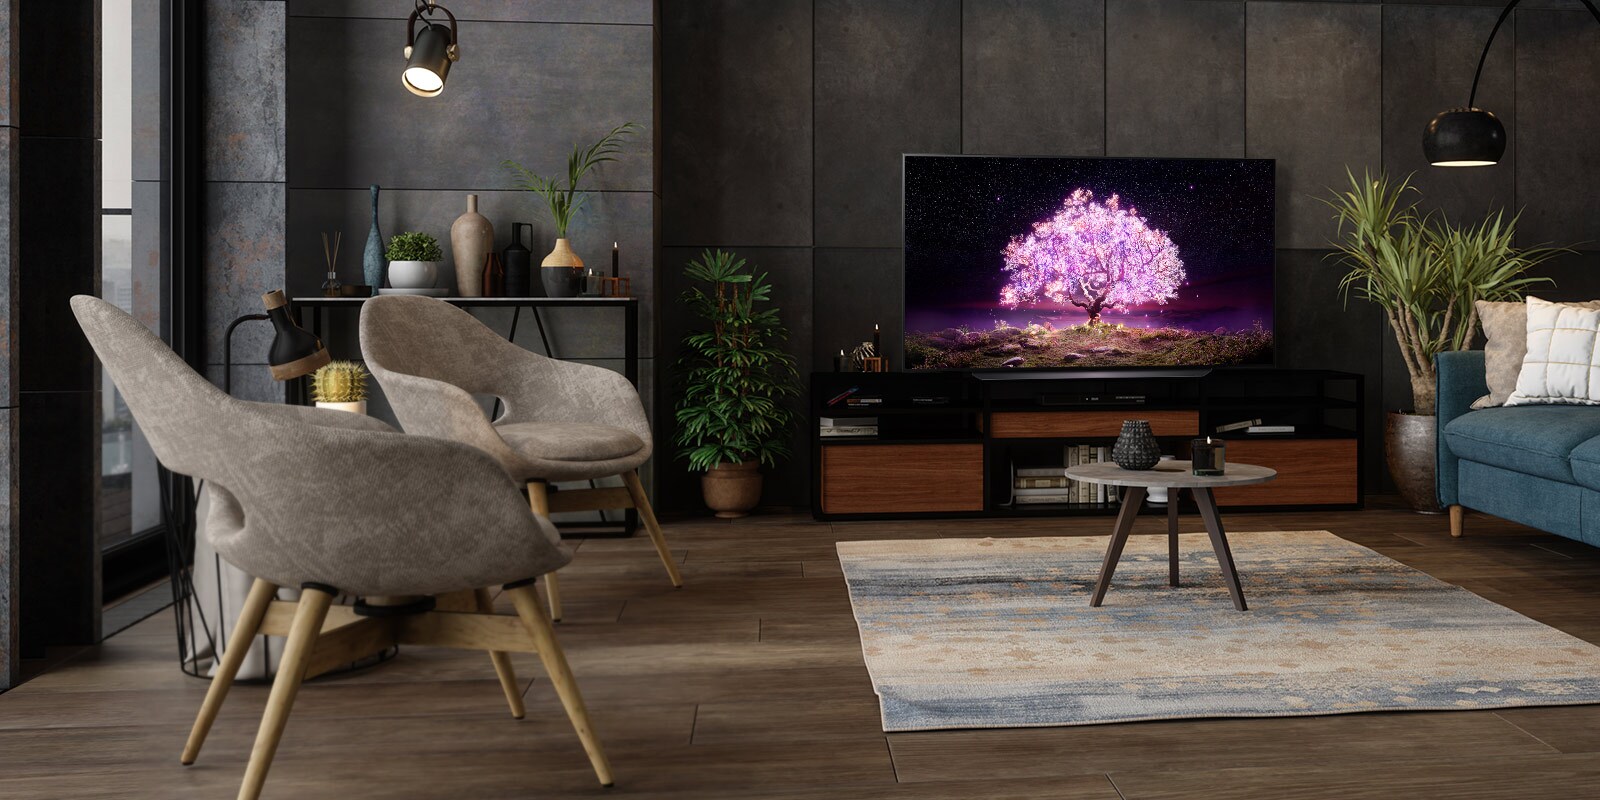 An OLED A1 TV placed in a sensuous living room. On the TV, you can see an image of a brightly glowing green tree.